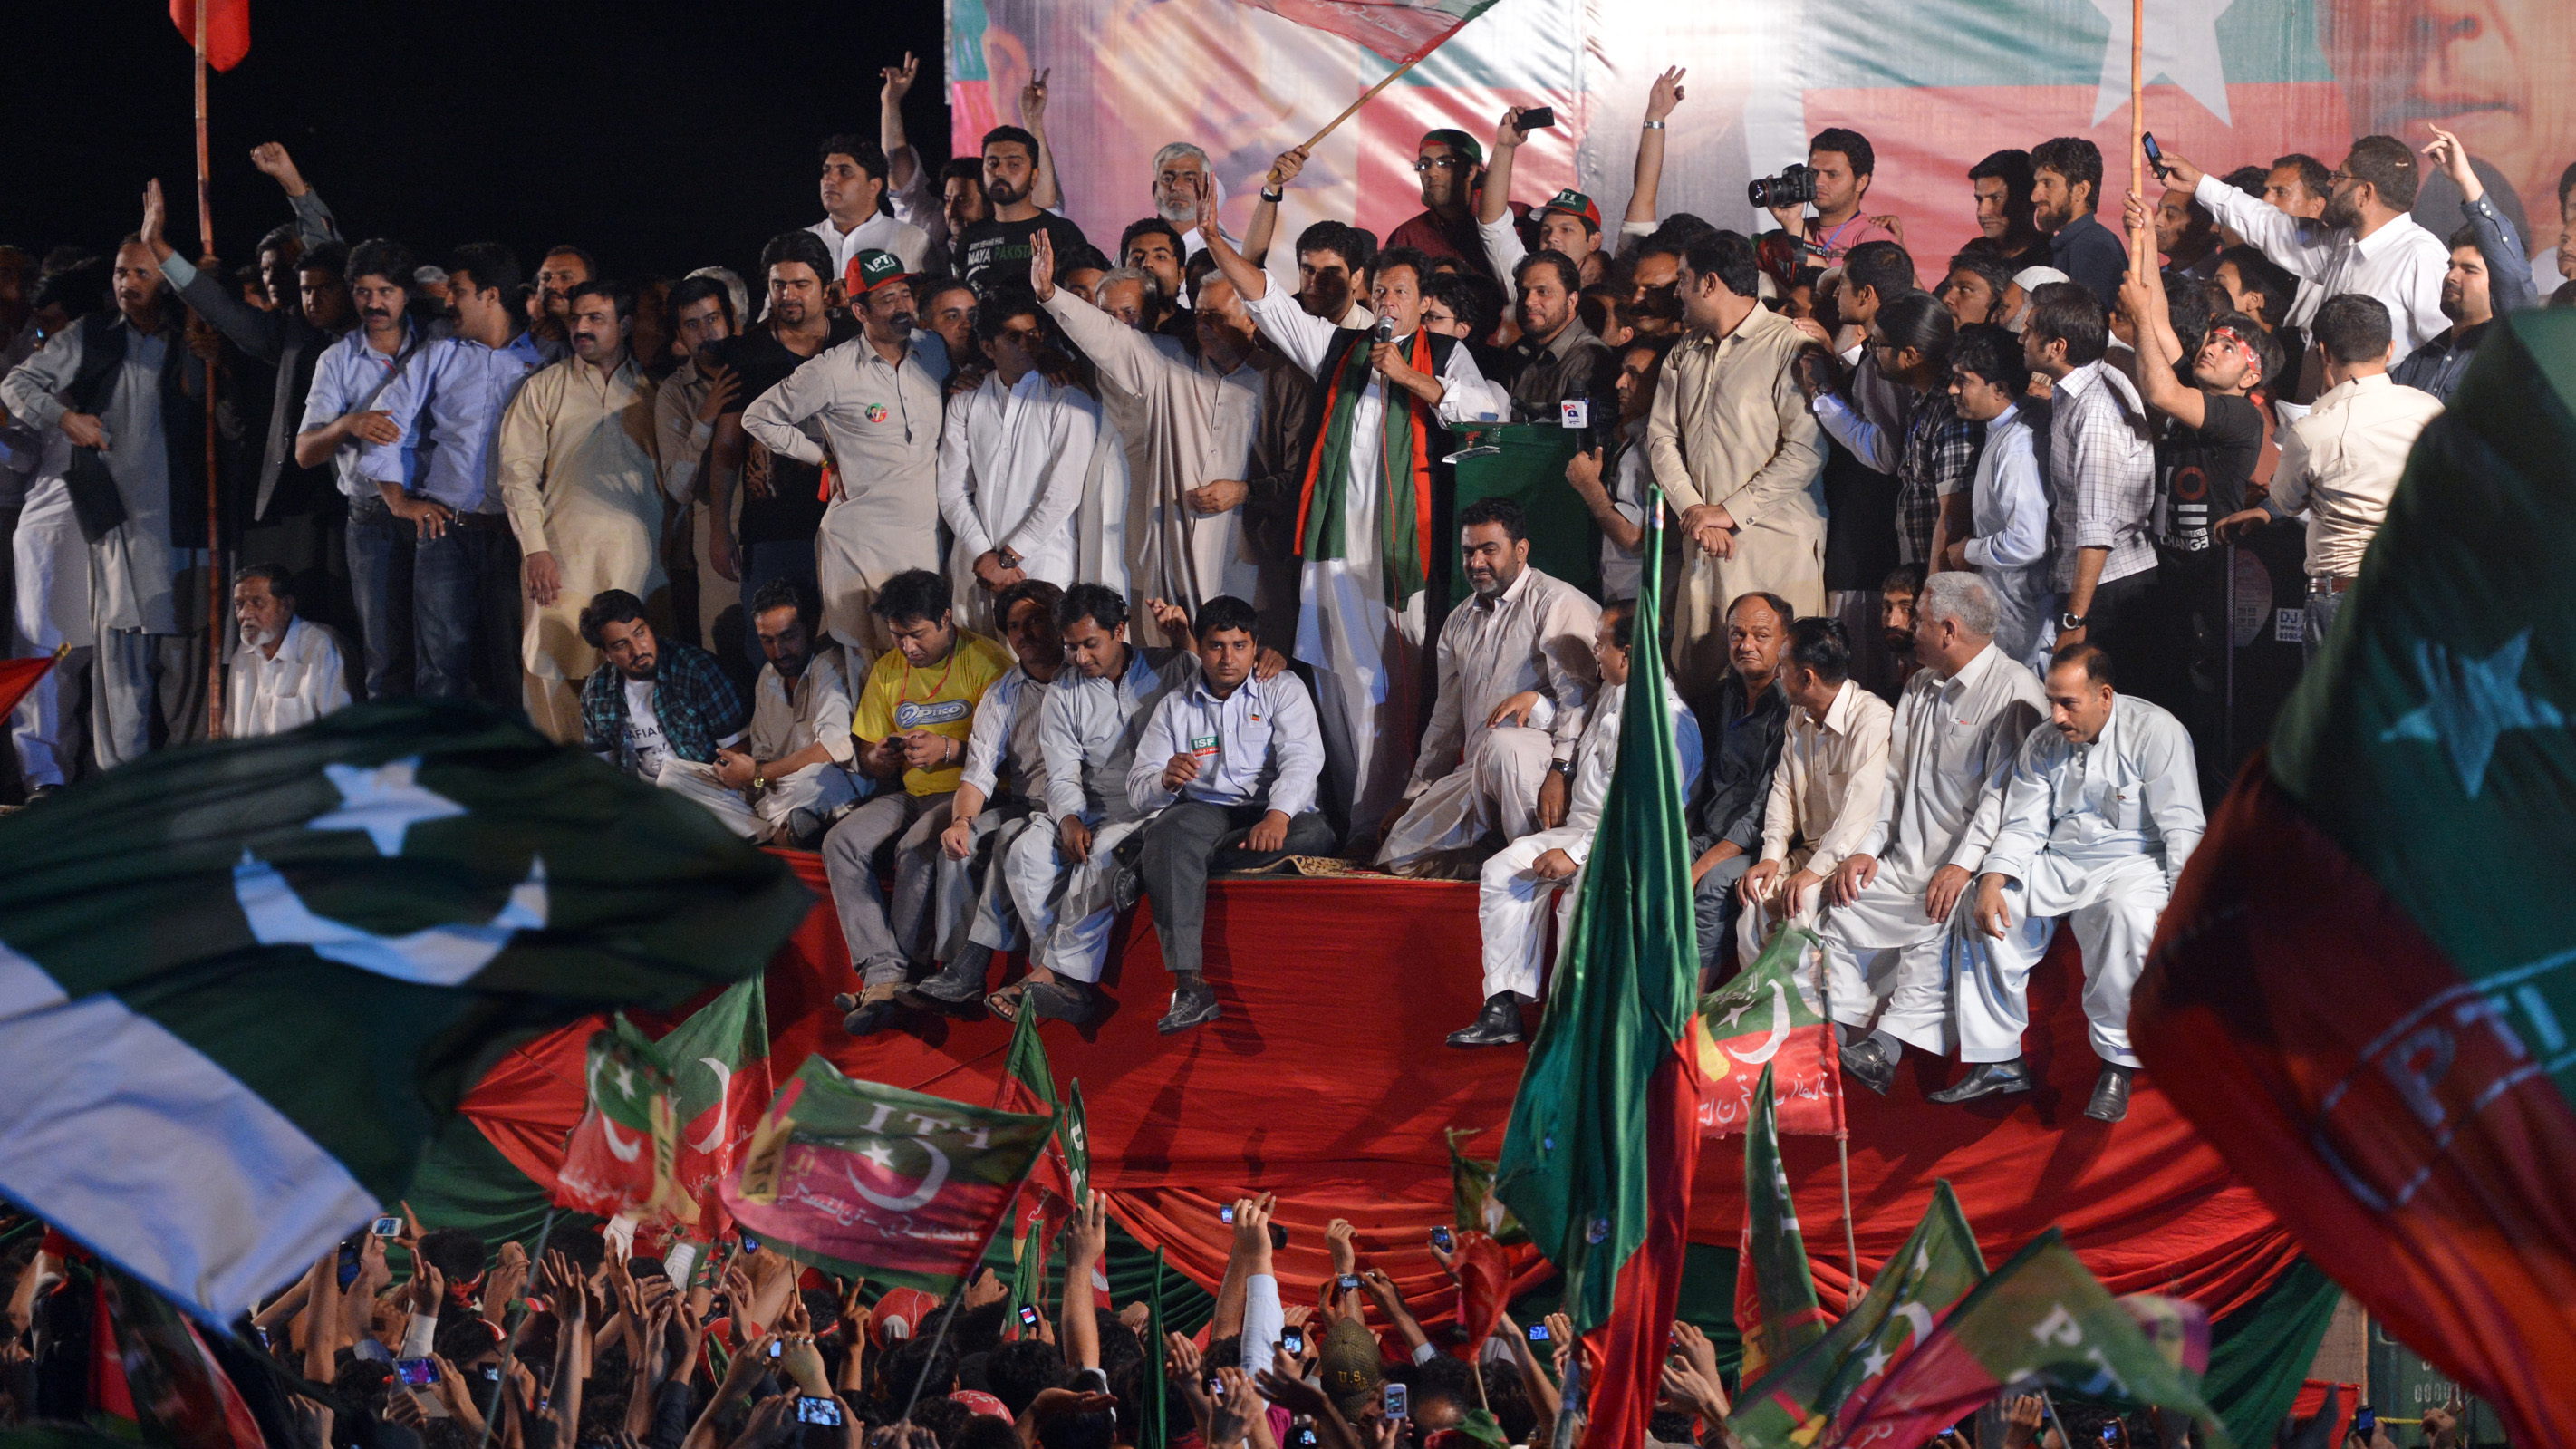 Pakistan's elections on 11 May are a huge landmark, marking a once-in-a-lifetime opportunity for a country with a deep desire for change, writes Anwar Akhtar. Prepare for the tightest race in years.